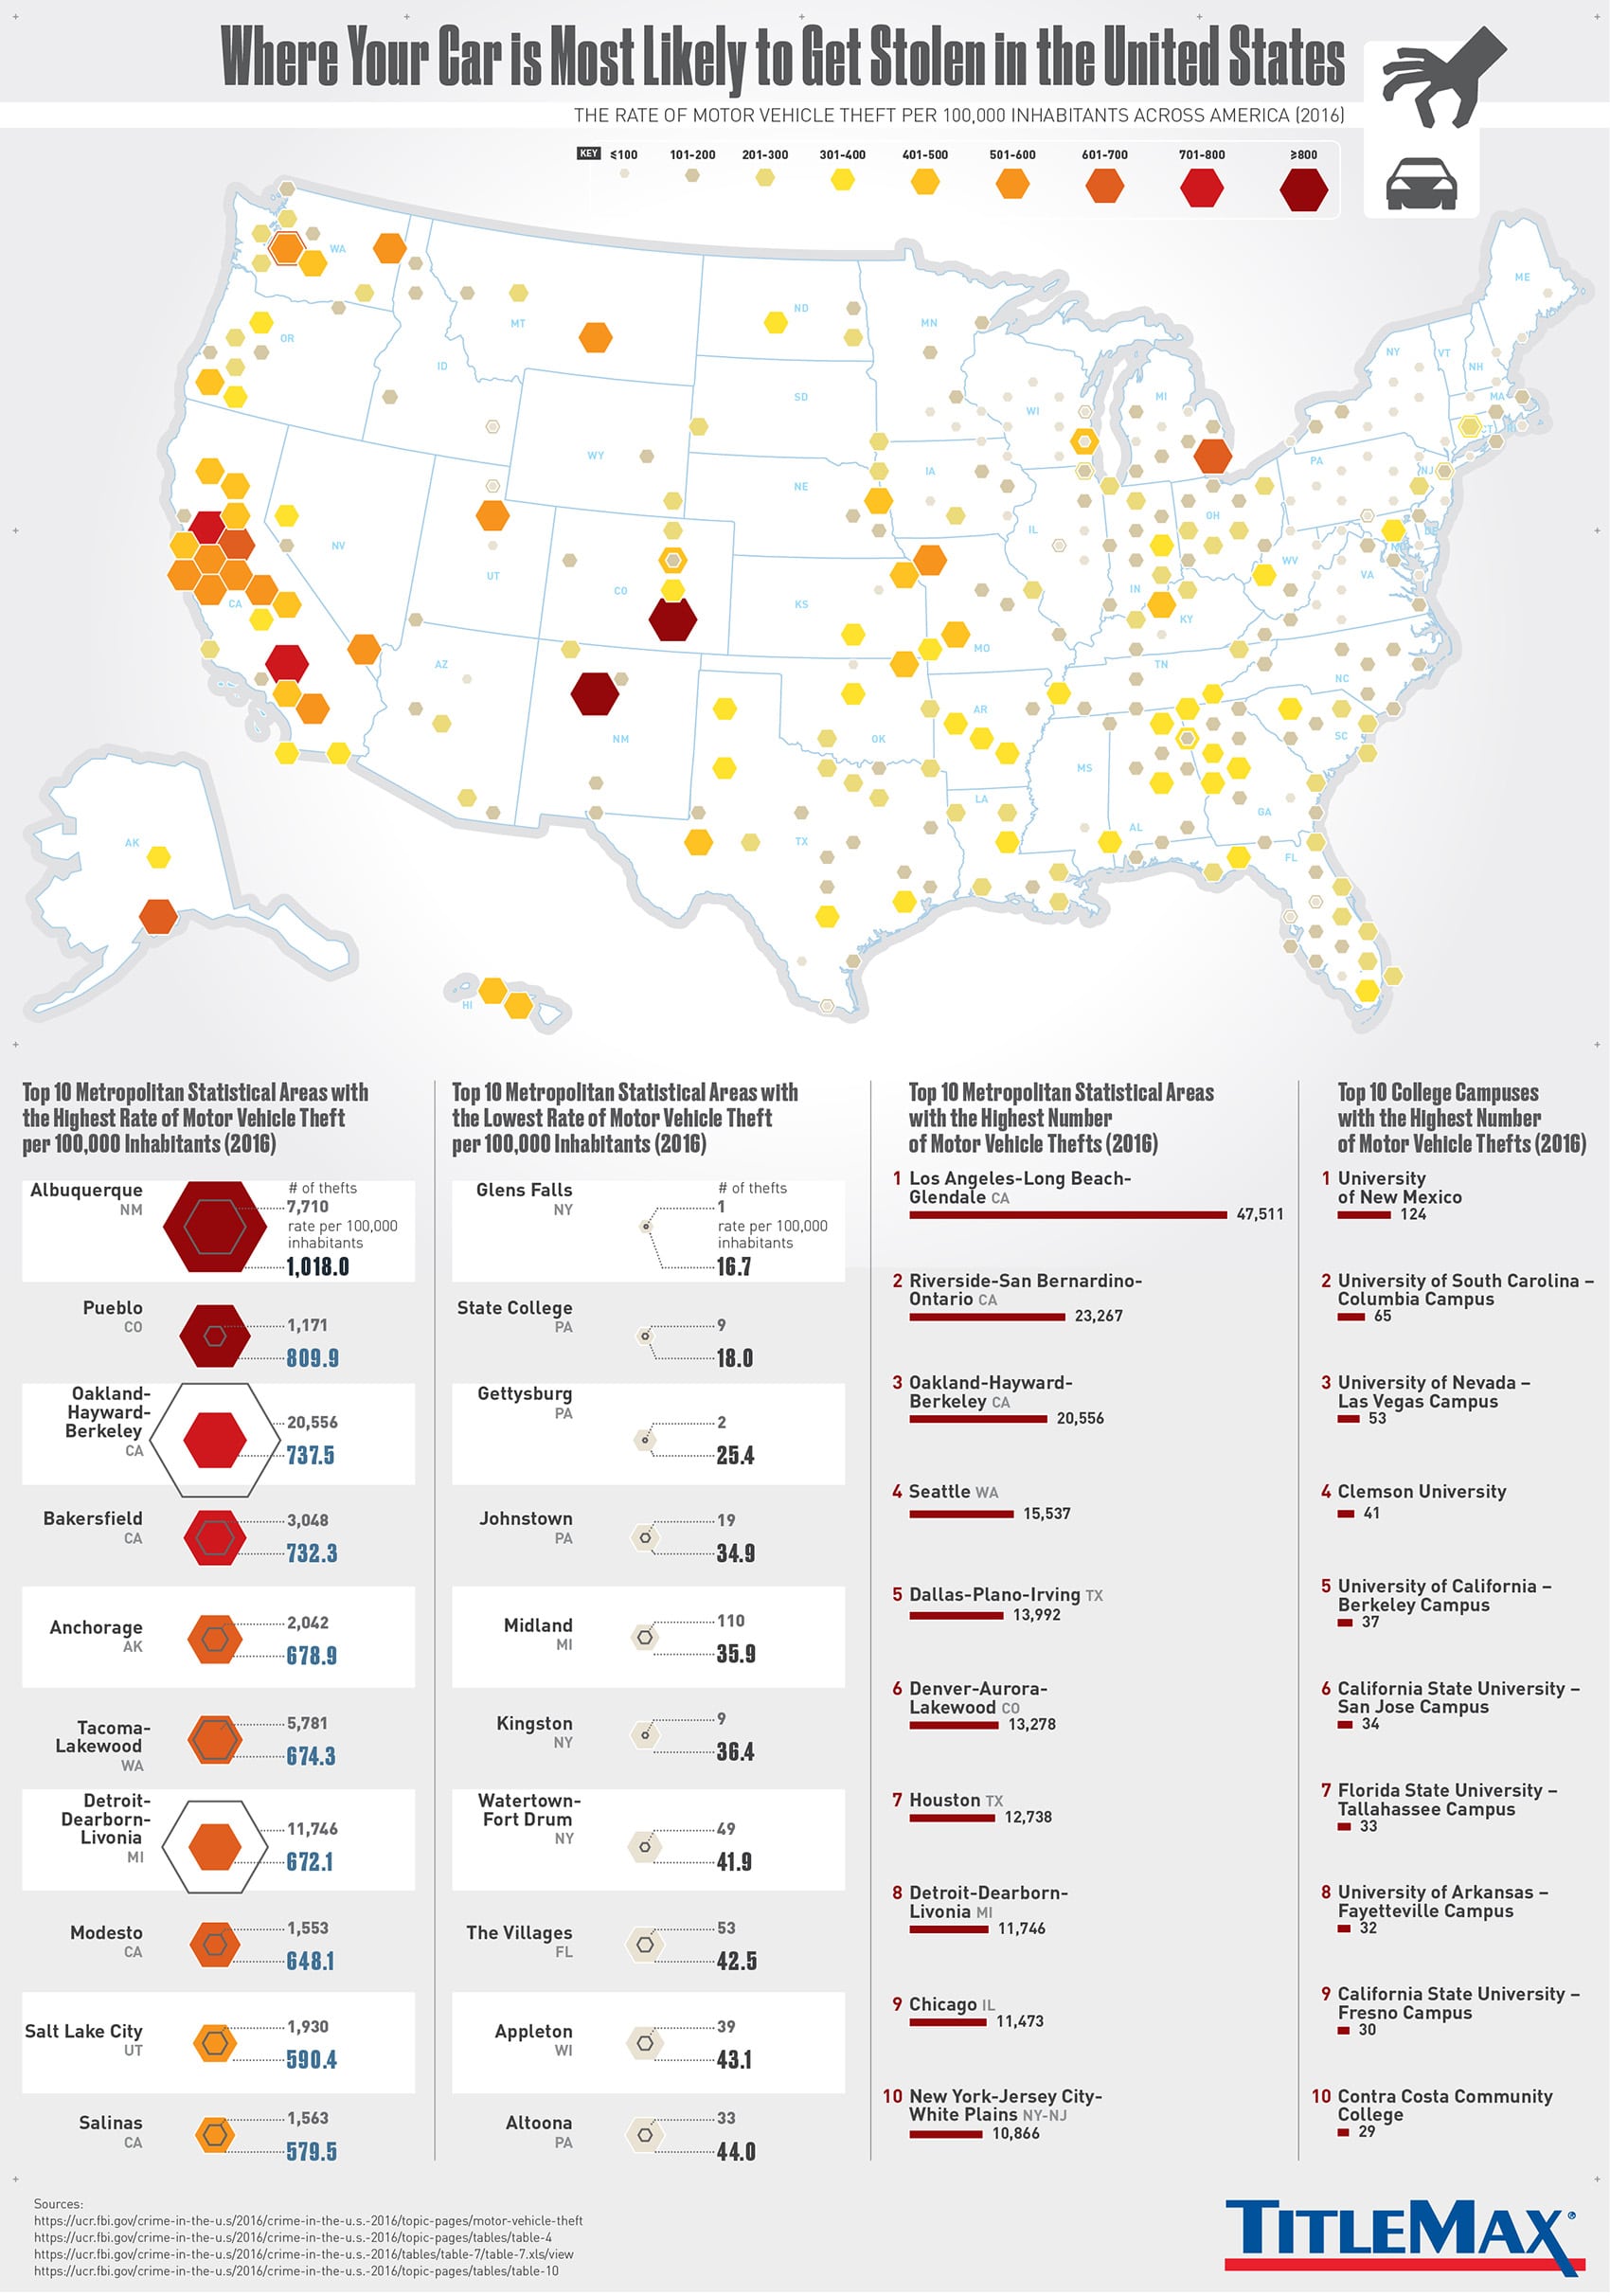 Where Your Car is Most Likely to Get Stolen in the U.S.